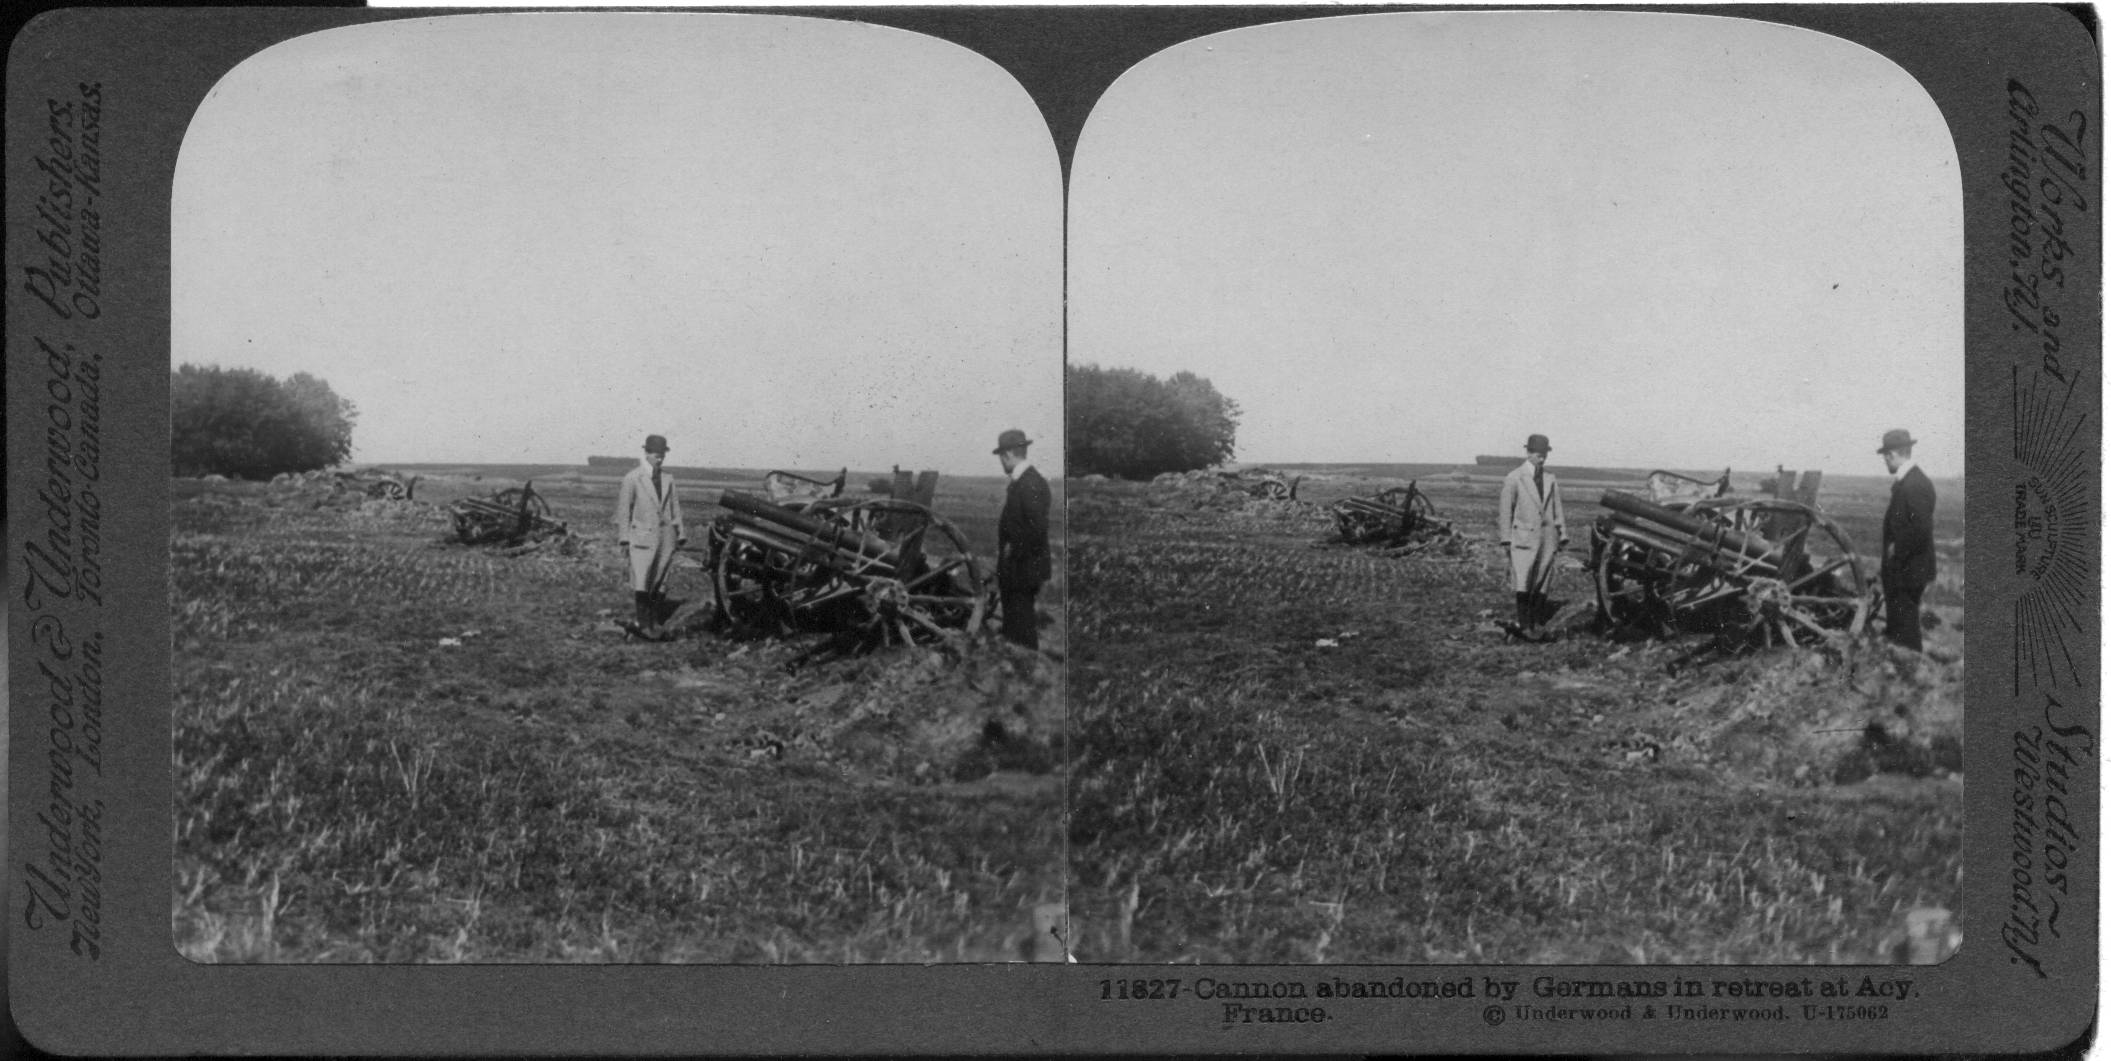 Cannon abandoned by Germans in retreat at Acy, France